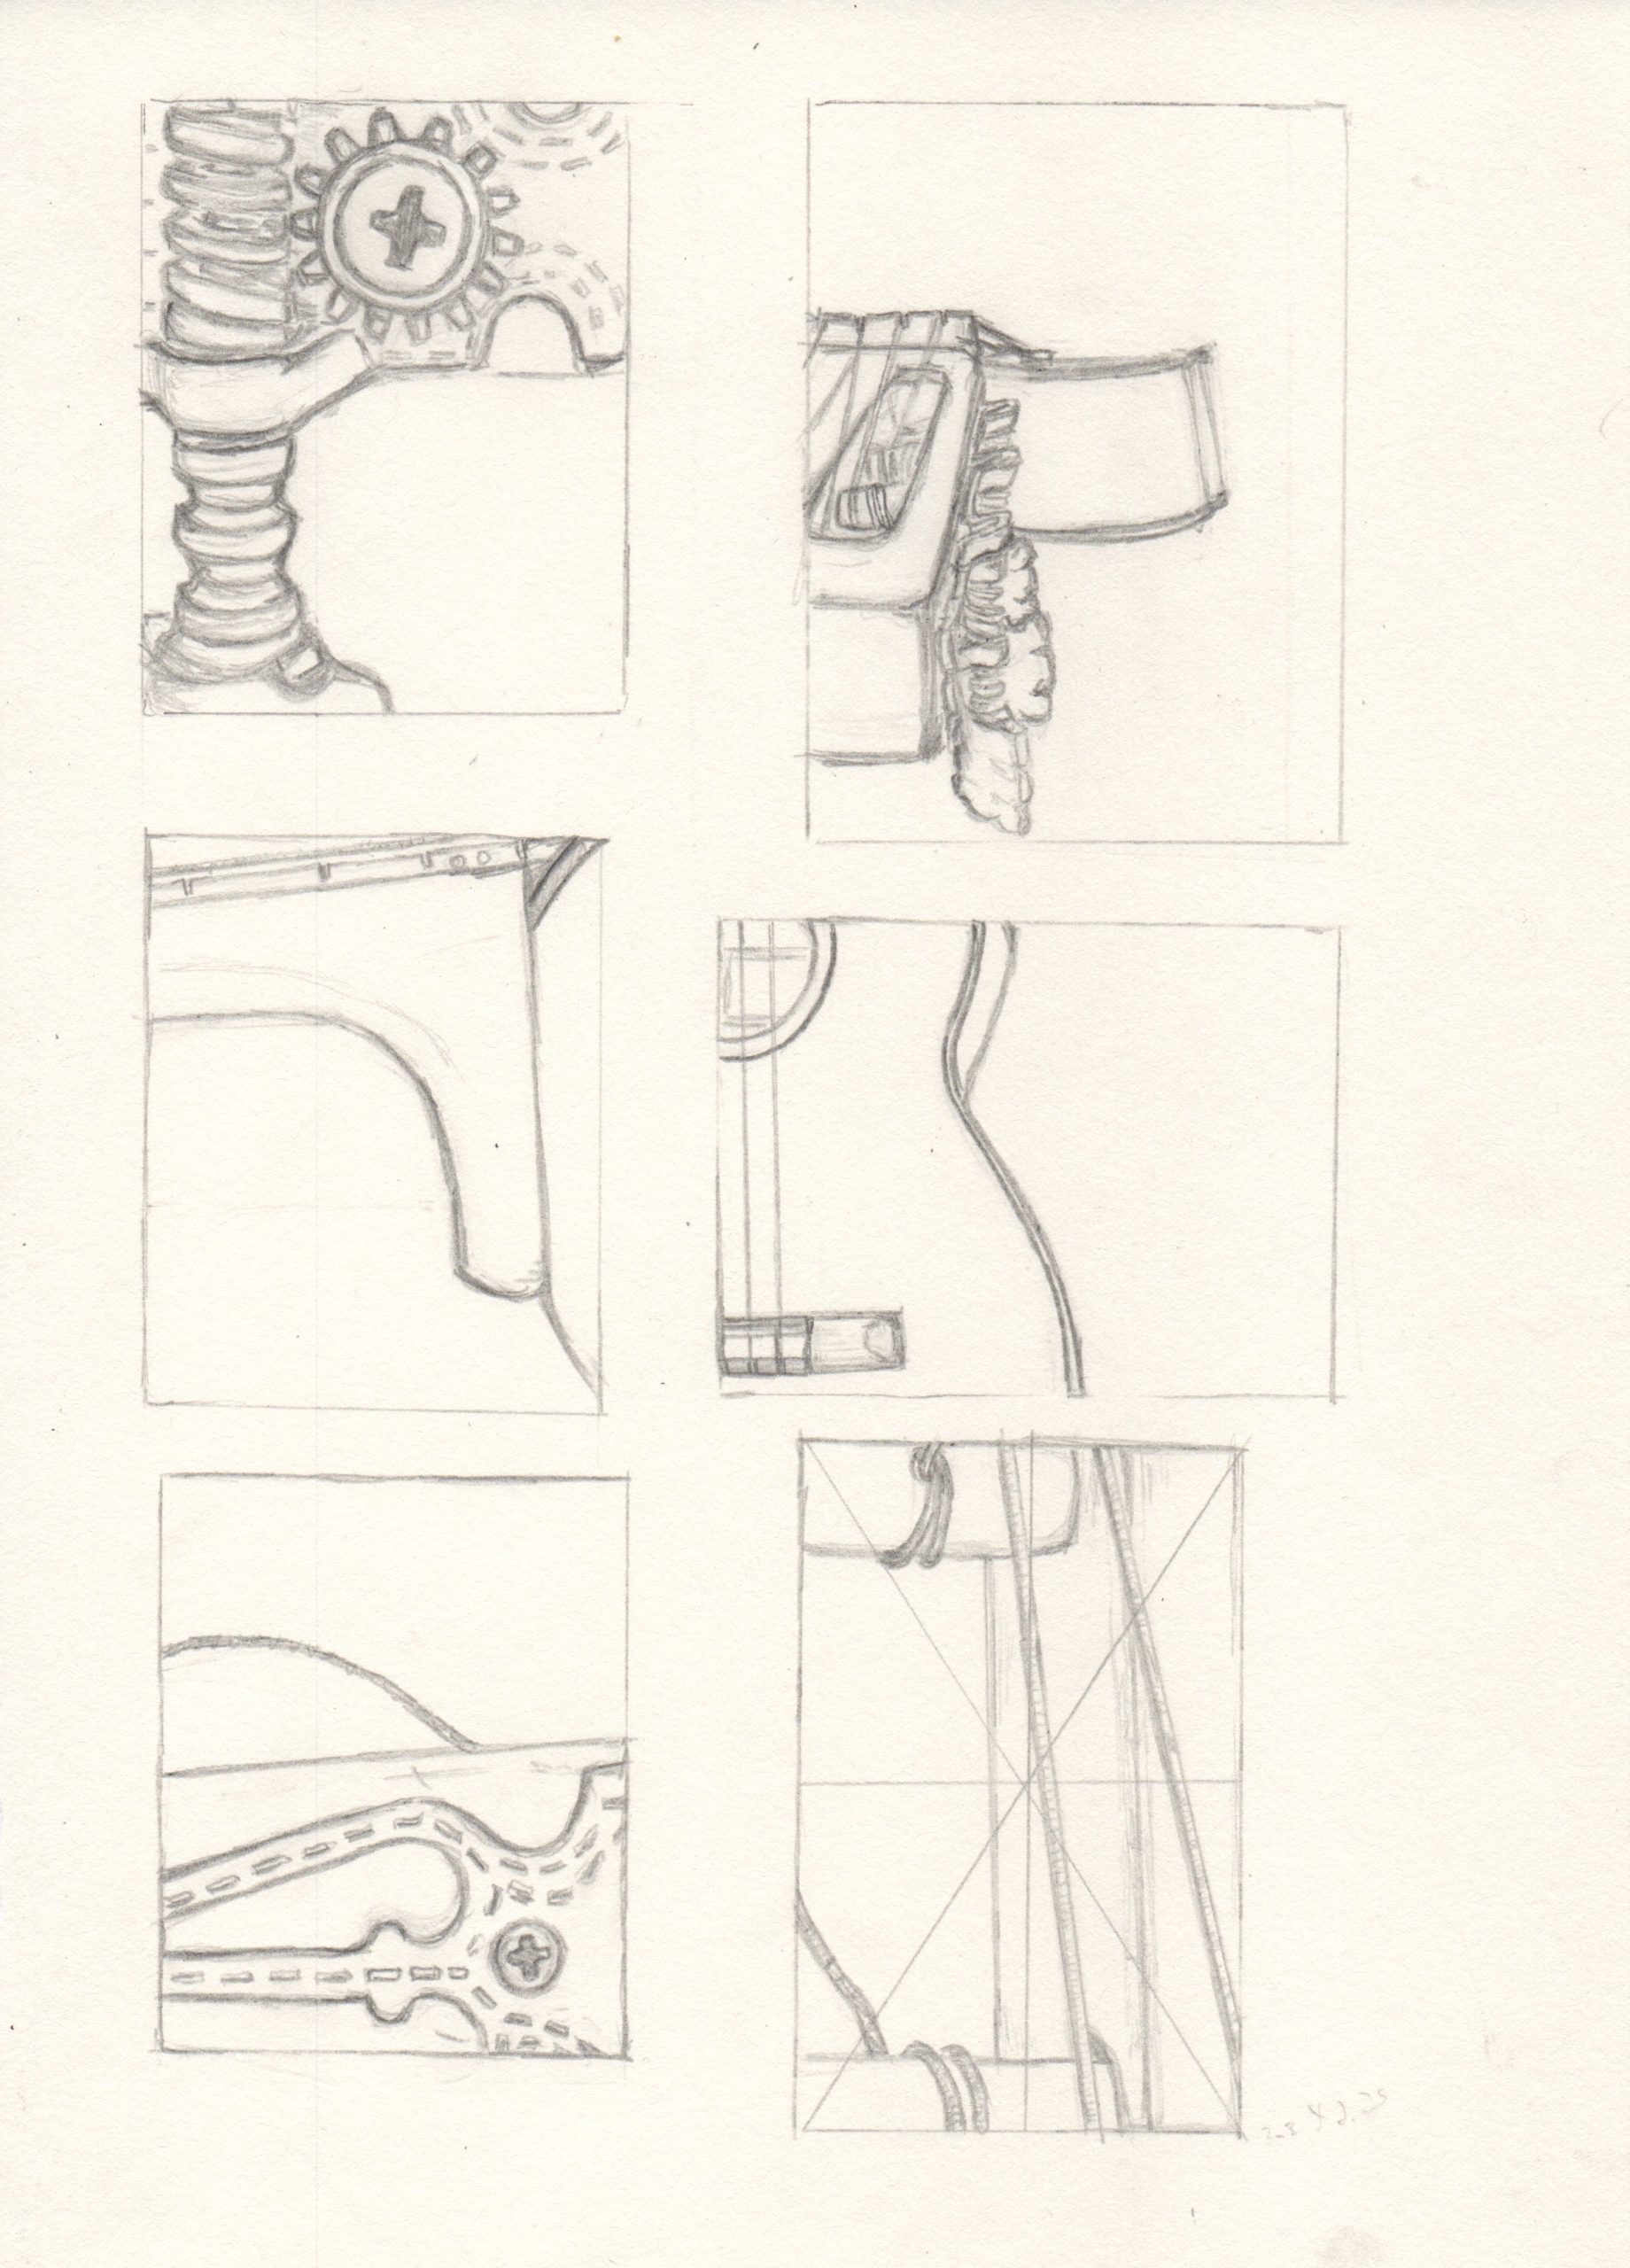 Thumbnail Sketches and Transpositions